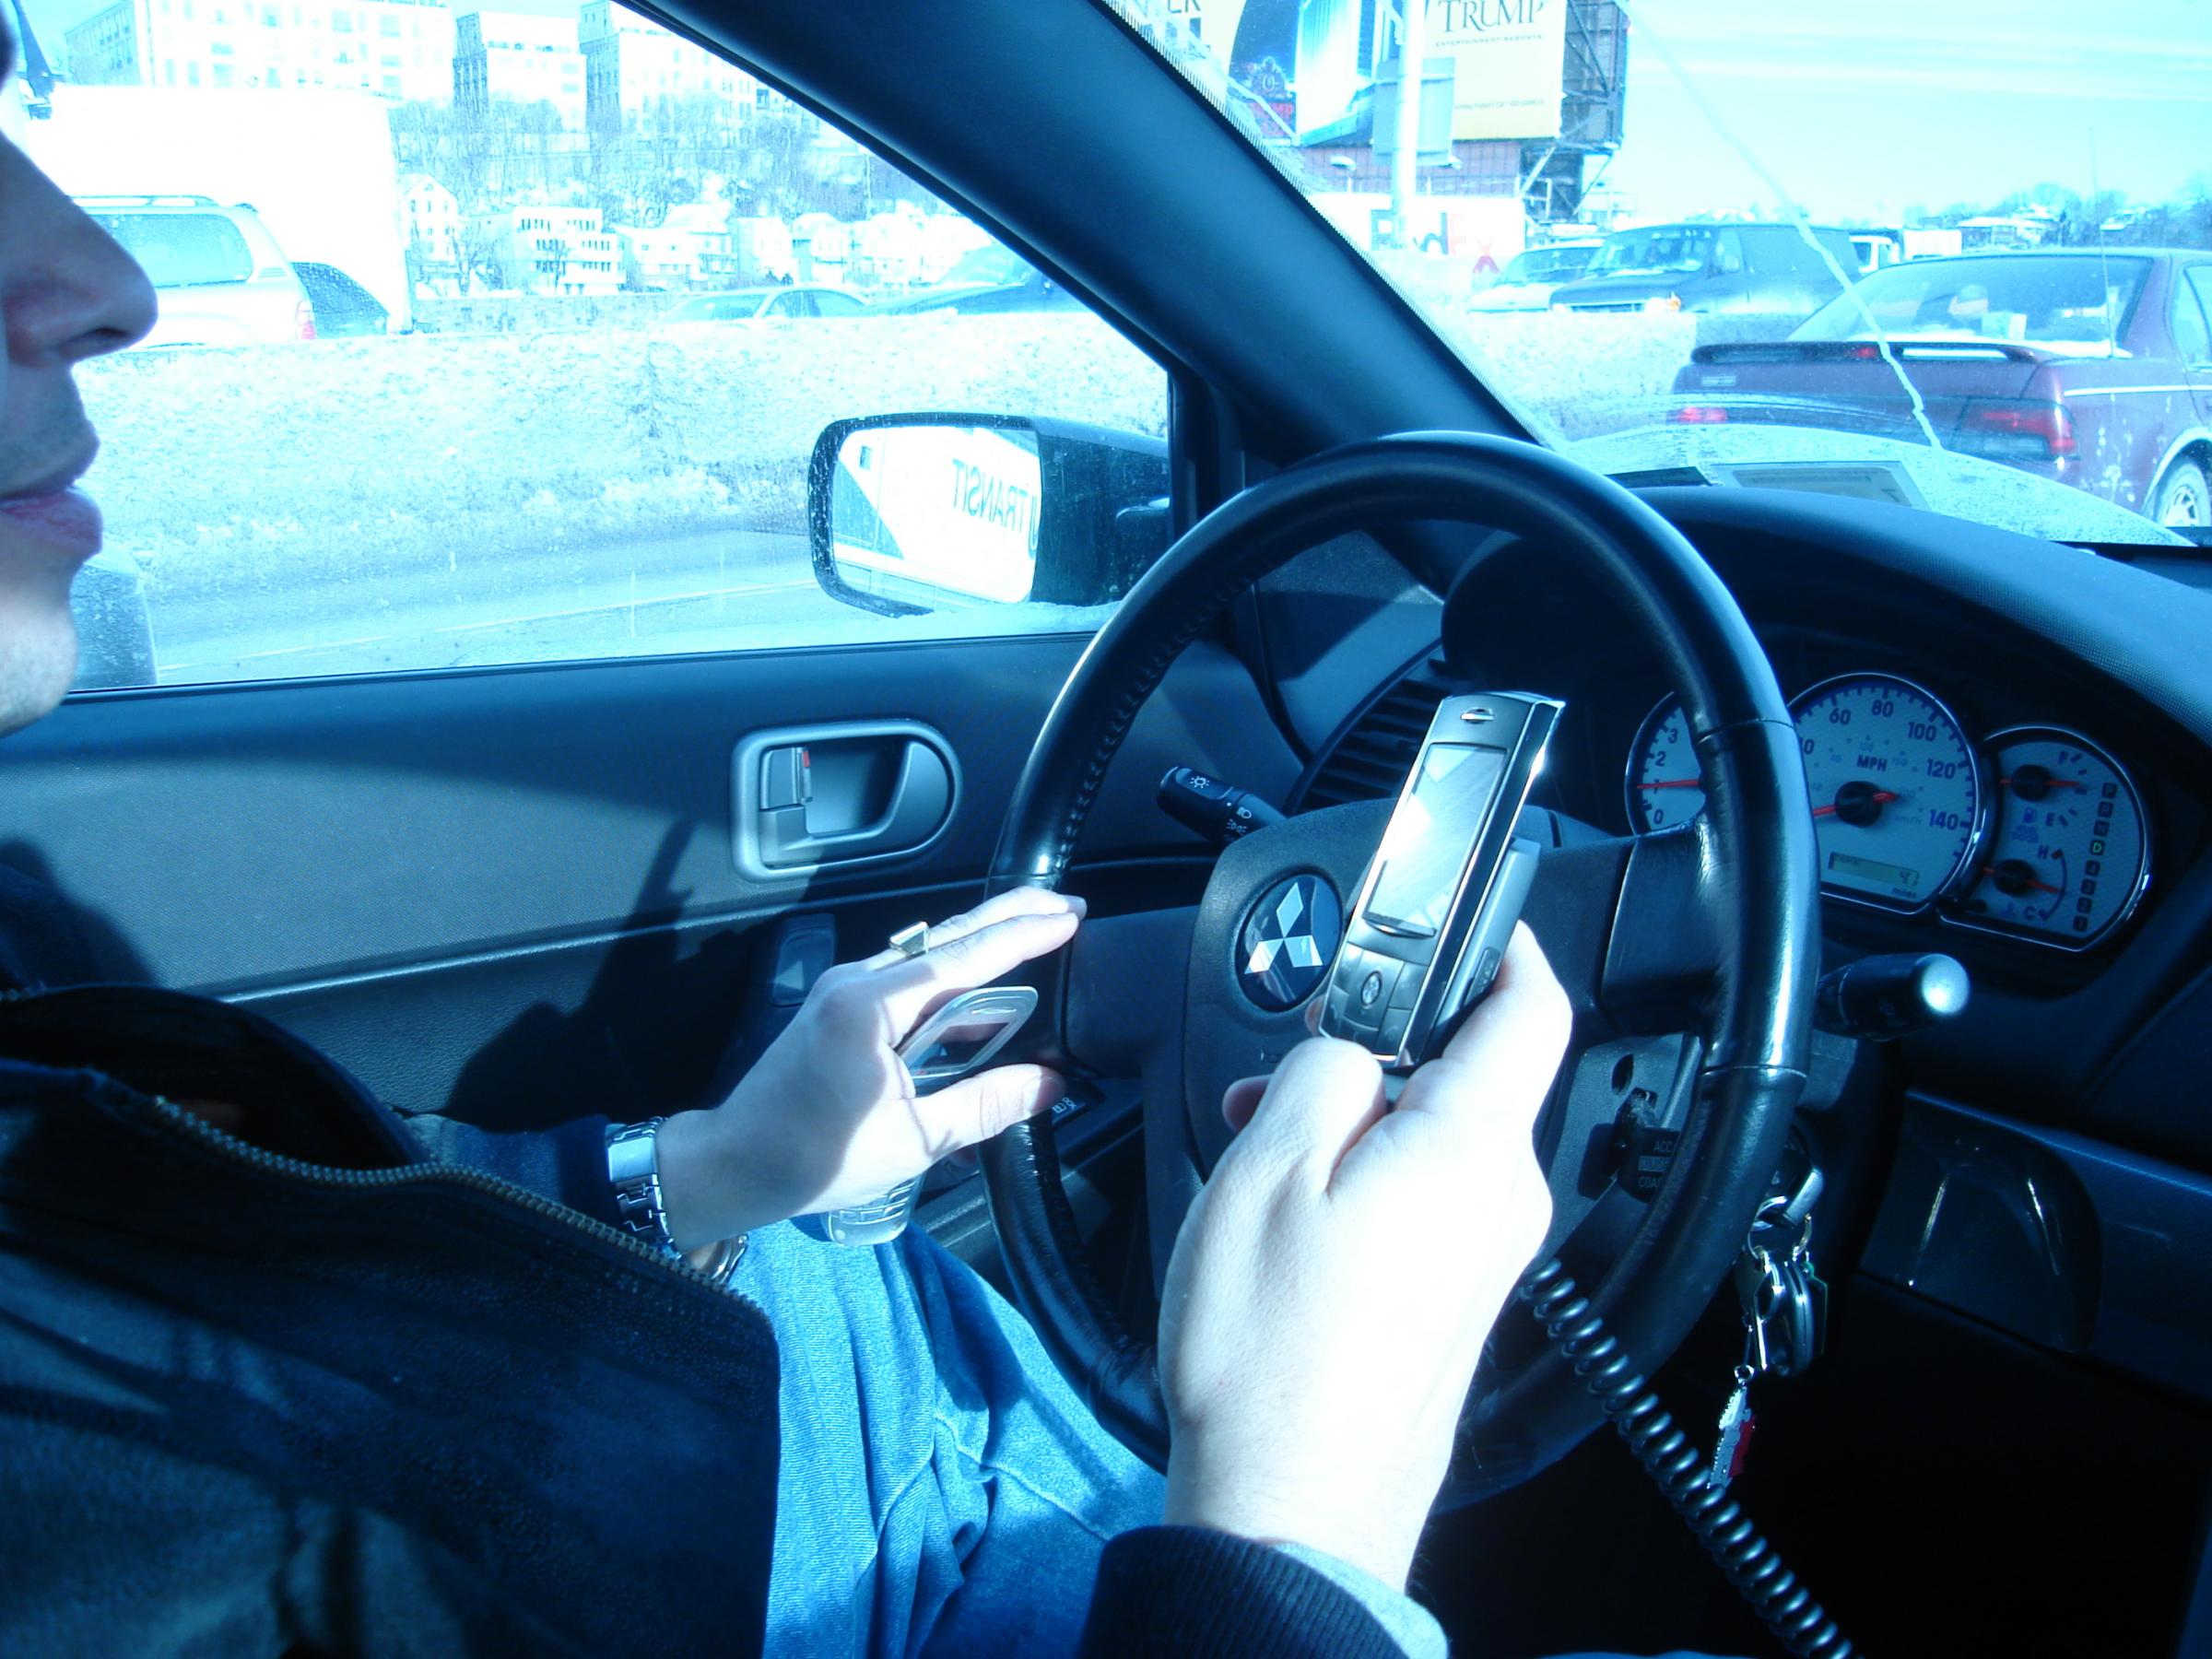 Stock images of drivers using mobile phones. Images via DPP Law on Flickr and Wikimedia Commons